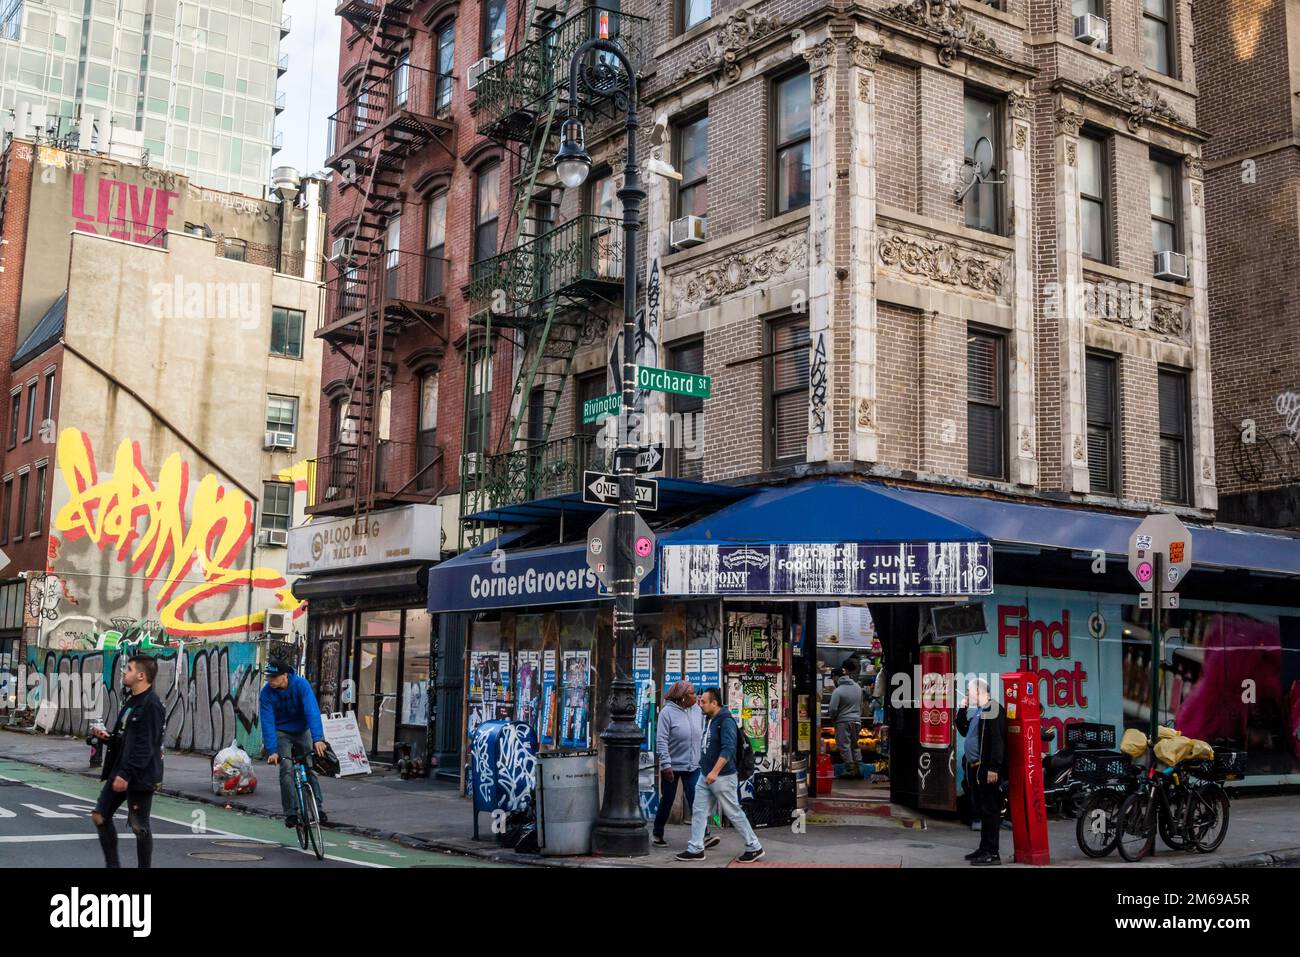 Street in the Bowery, un quartiere storico nel Lower East Side di Manhattan, New York City, USA Foto Stock